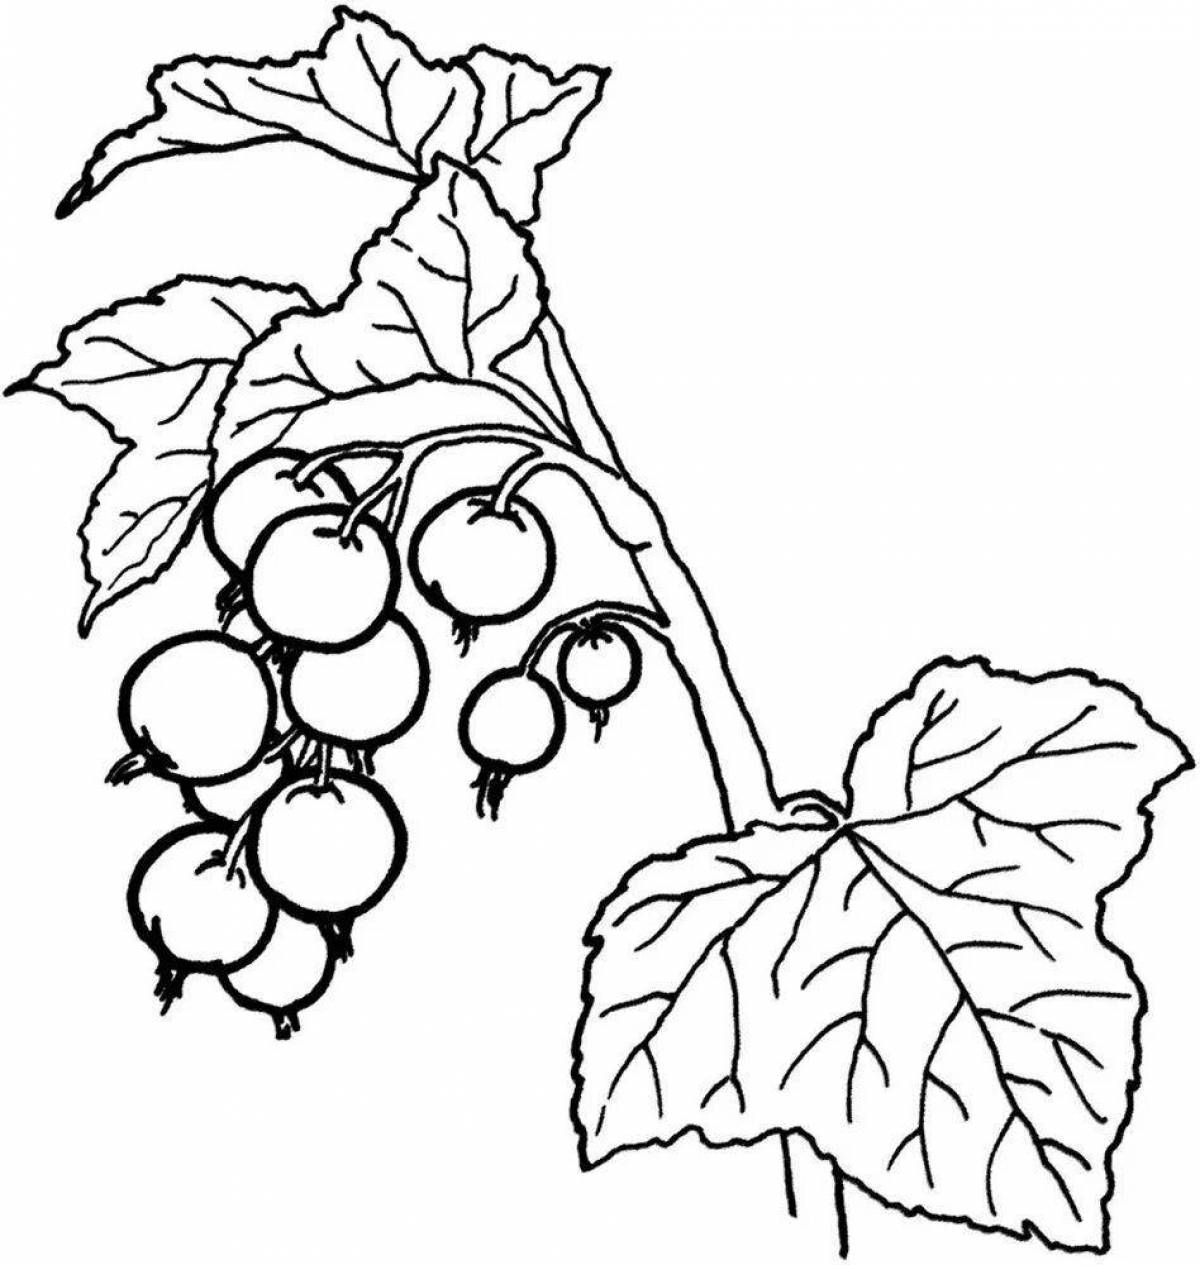 Living berries and fruits coloring book